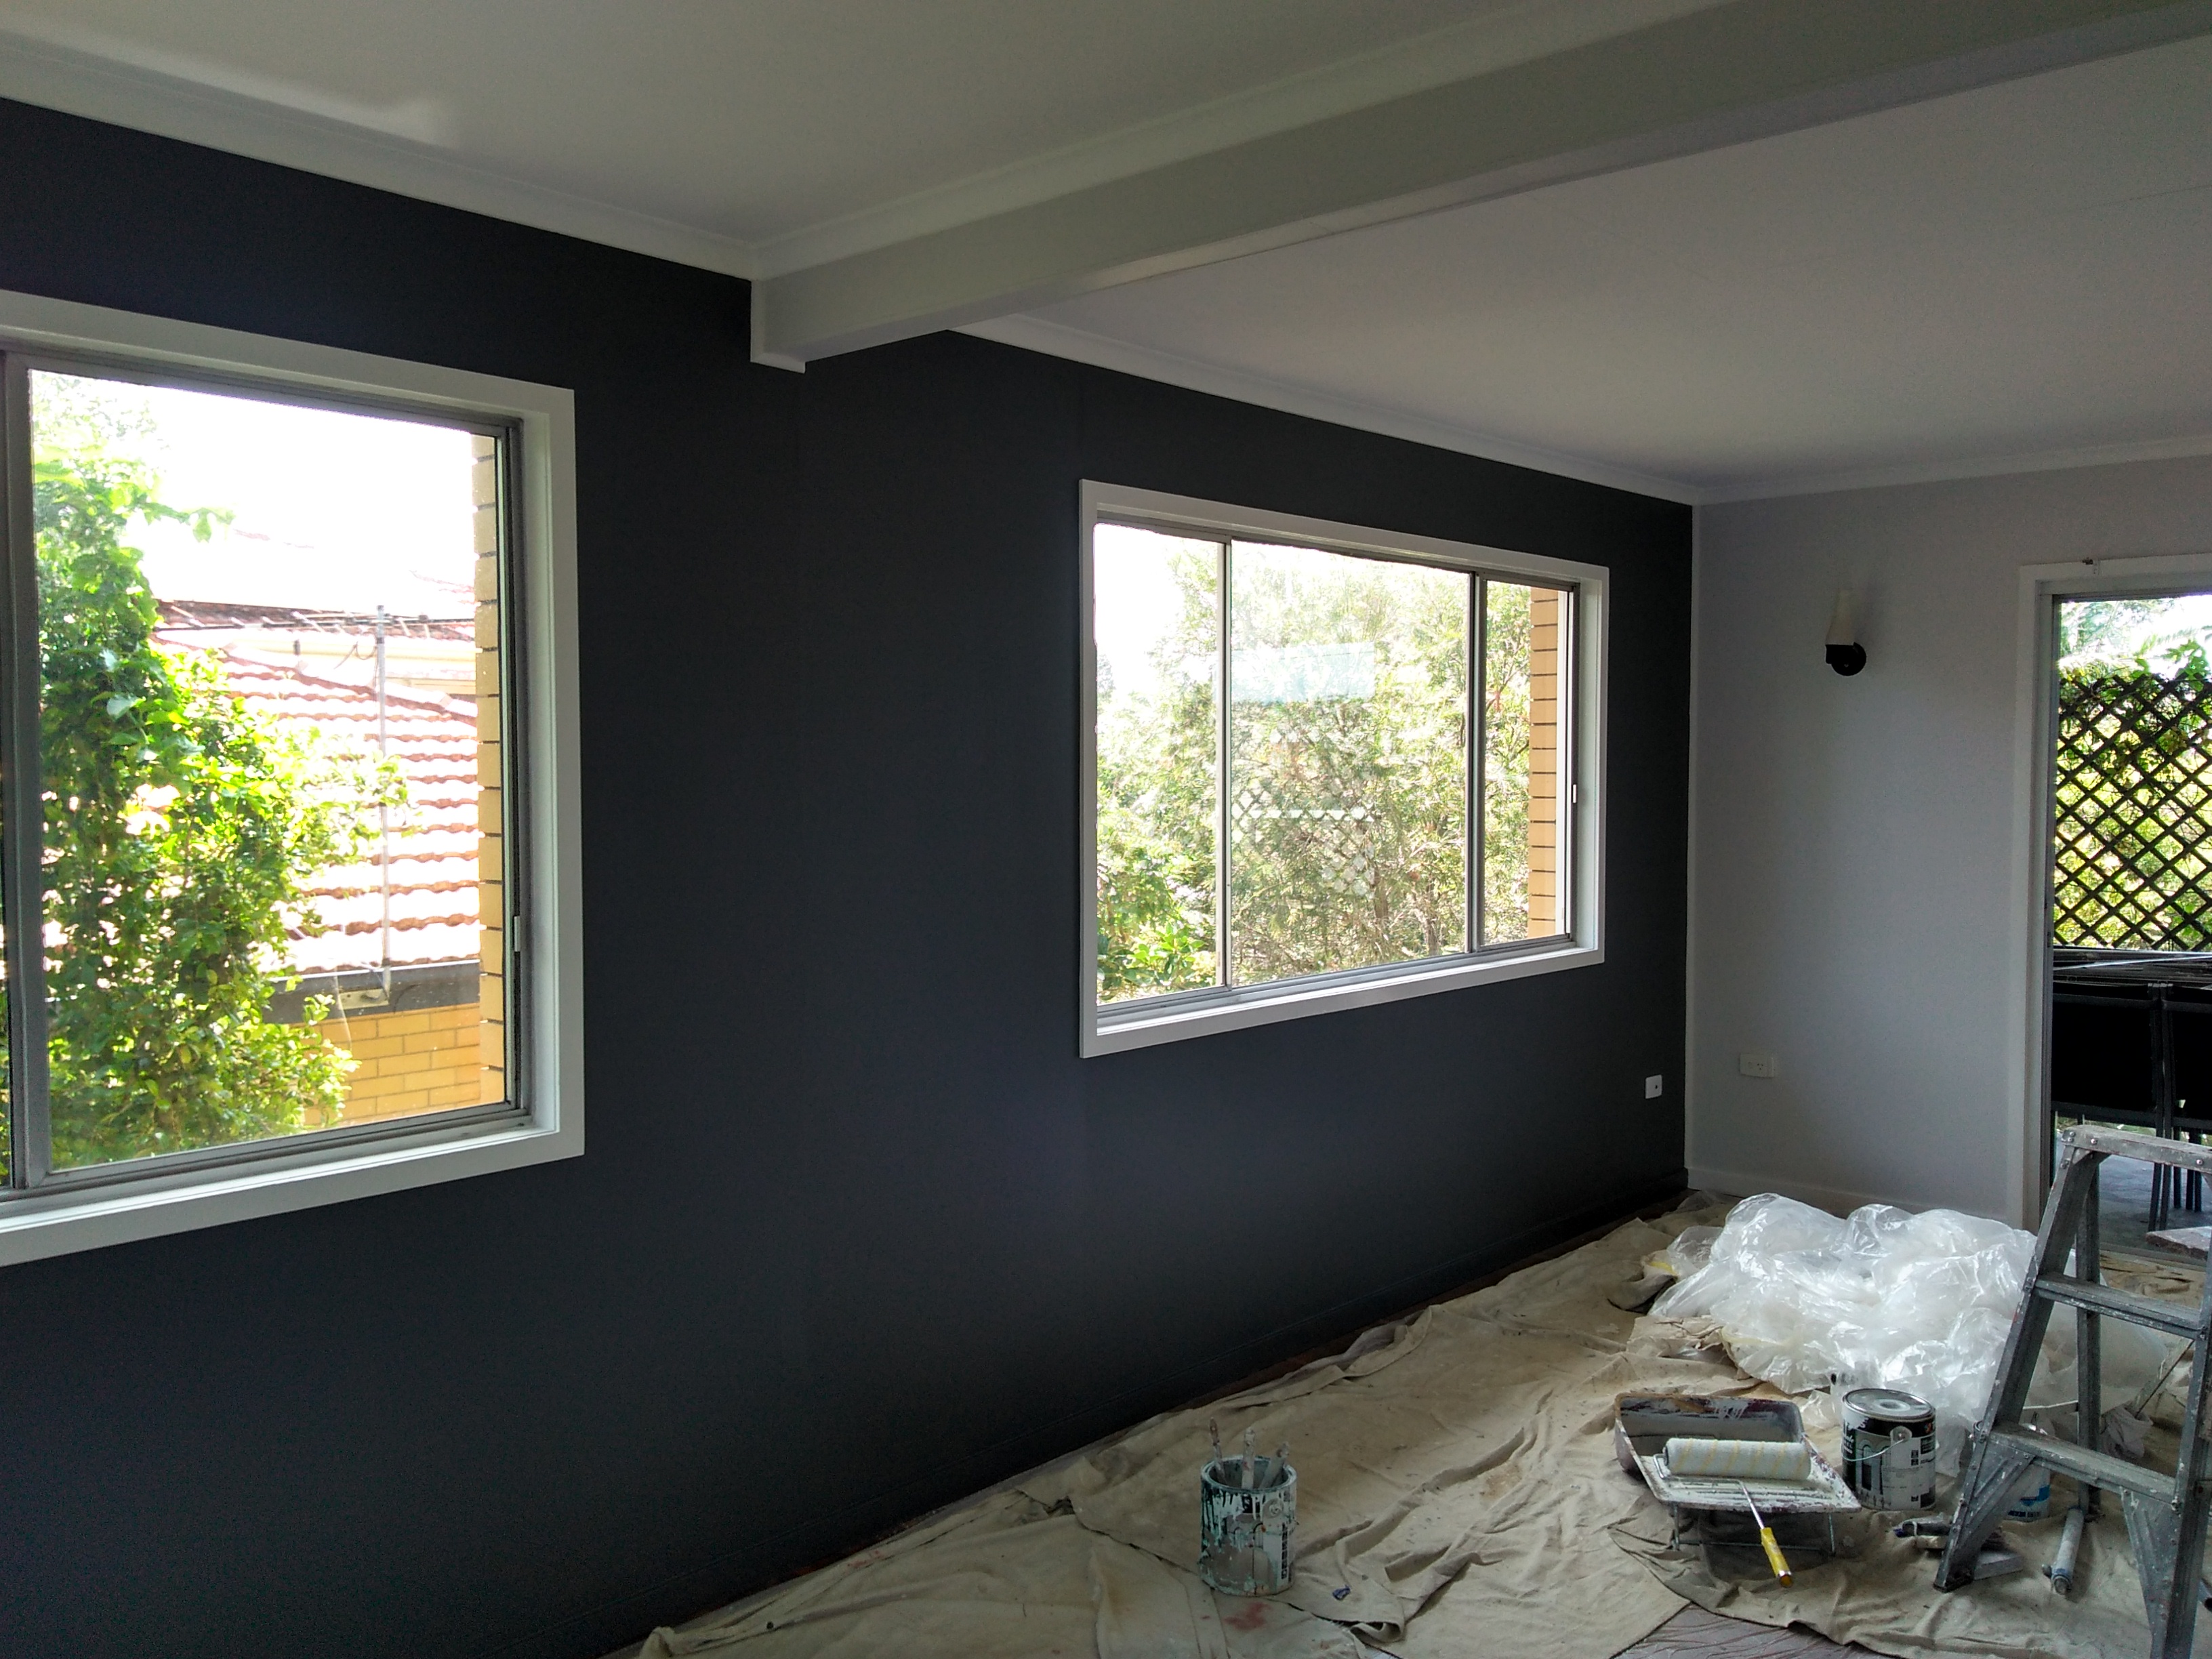 S and J Murphy Painters Deception Bay 0408 197 663